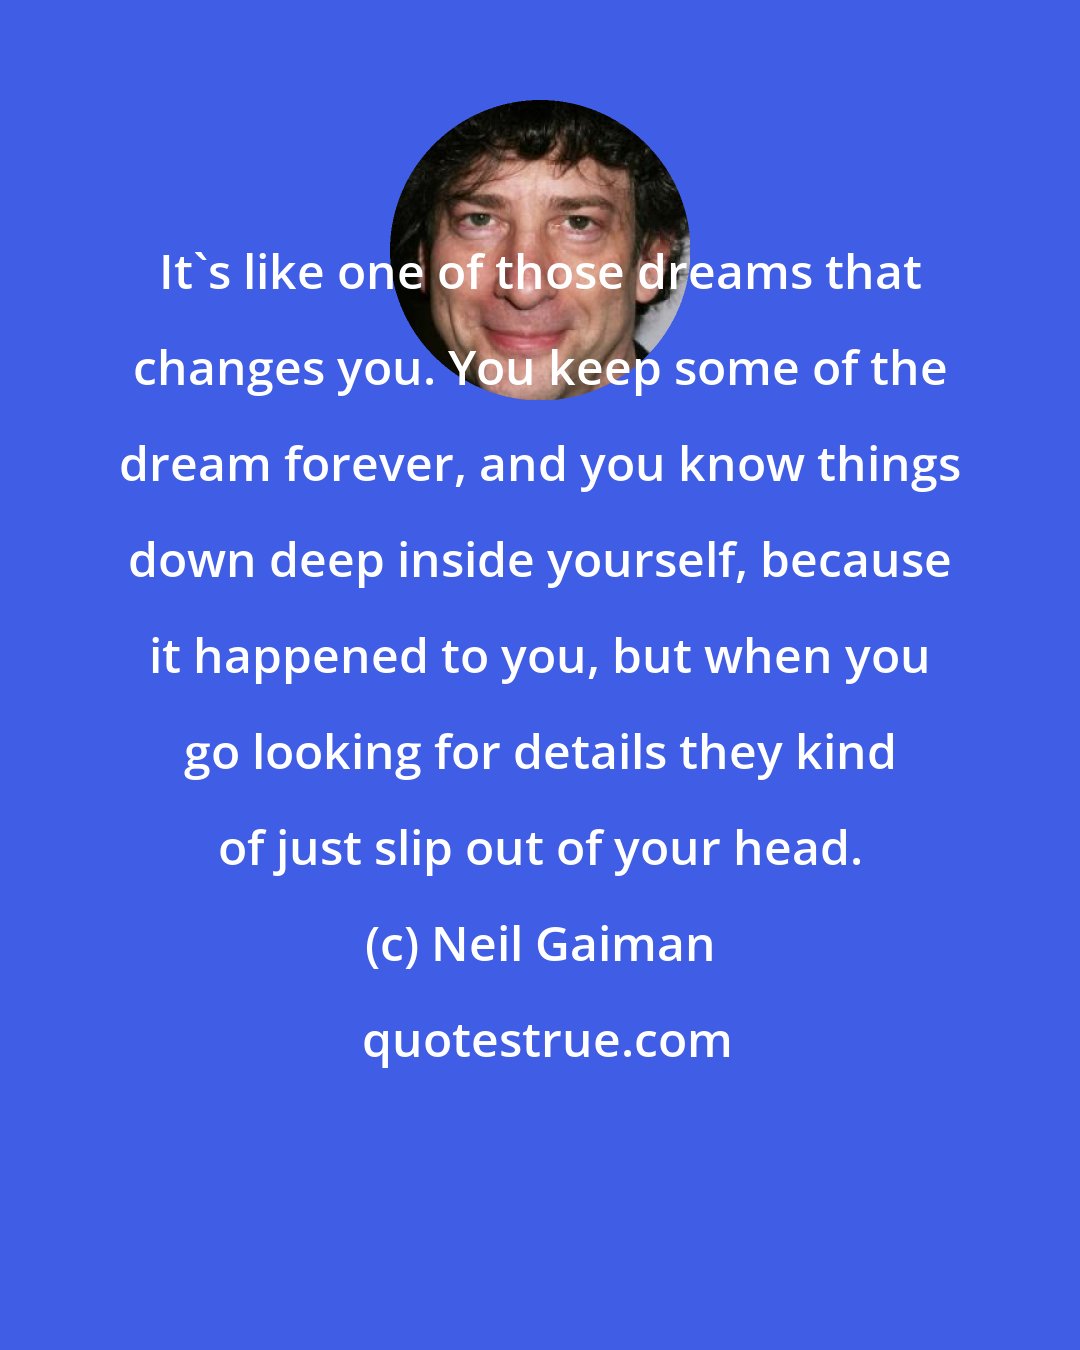 Neil Gaiman: It's like one of those dreams that changes you. You keep some of the dream forever, and you know things down deep inside yourself, because it happened to you, but when you go looking for details they kind of just slip out of your head.